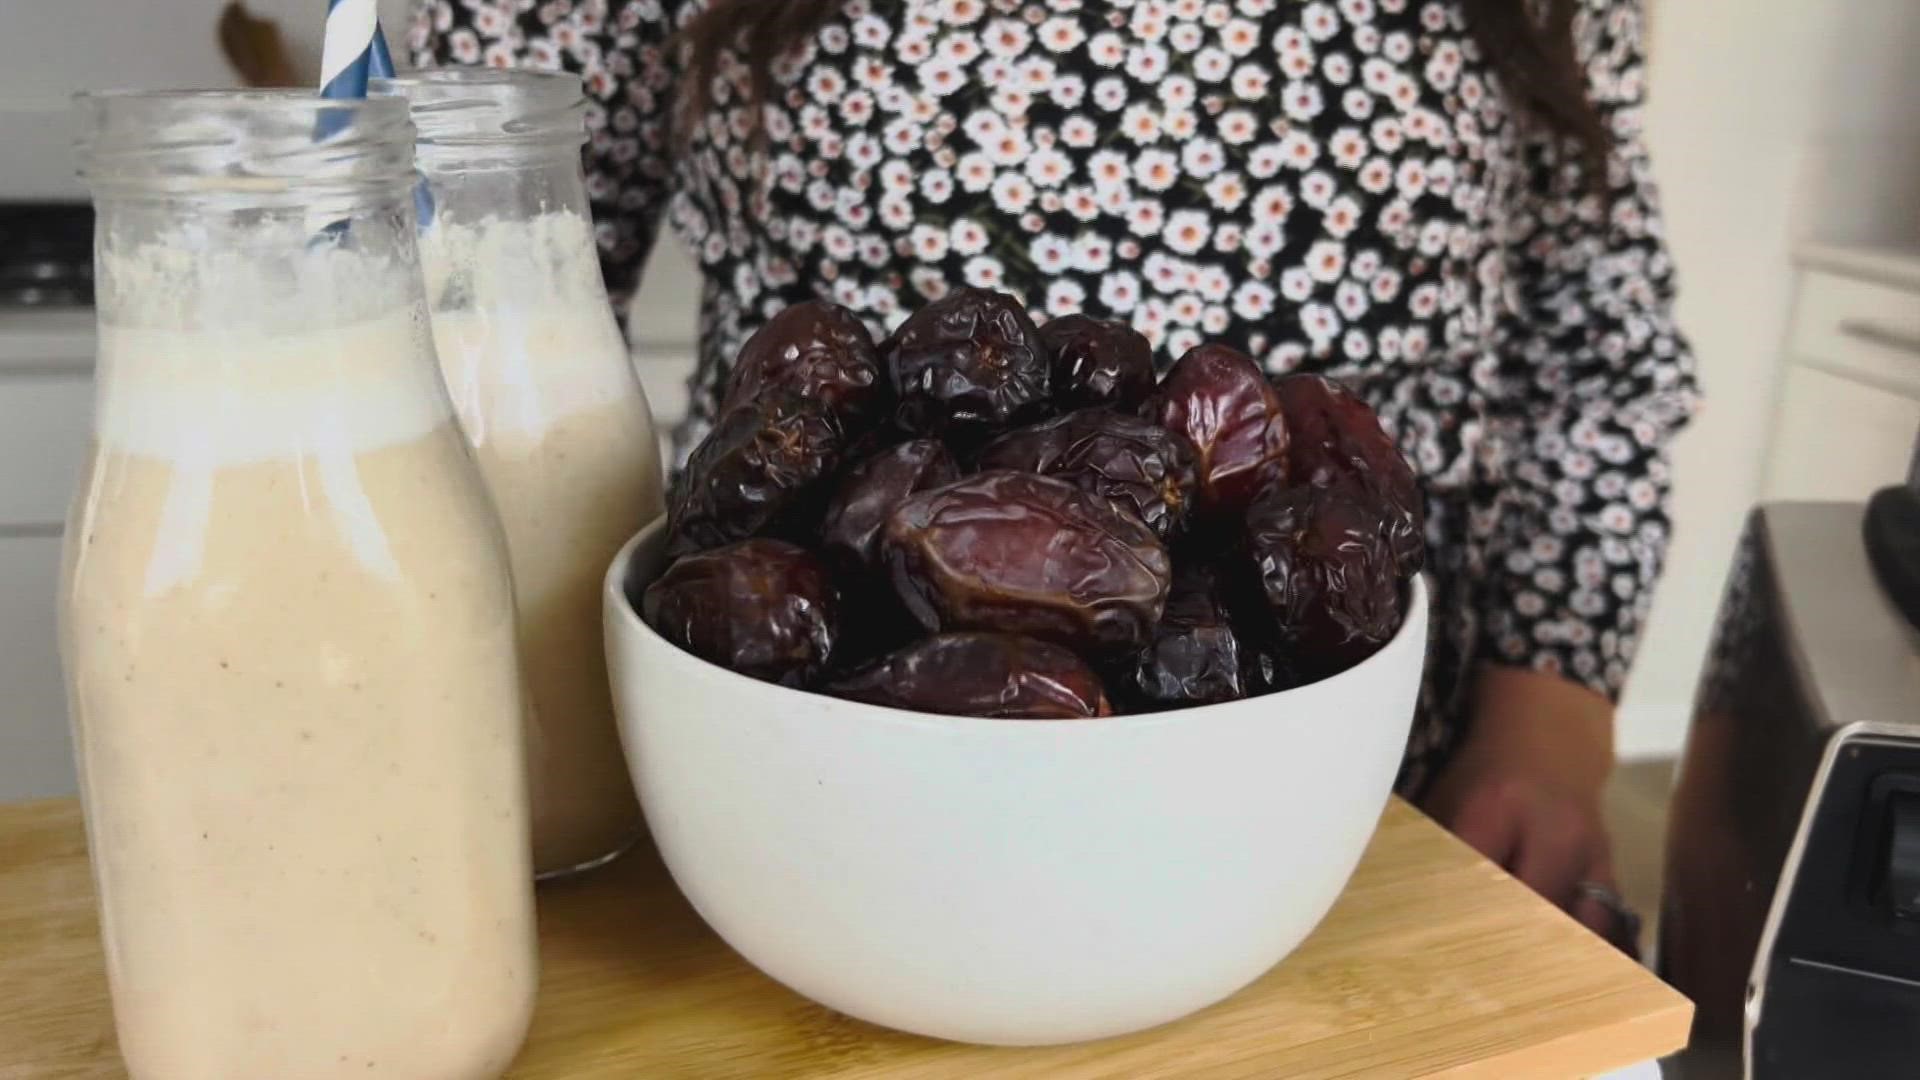 Dates are one of the most nutritious fruits we can eat and this dairy-free date milk recipe is a healthy way to naturally sweeten things like coffee and oatmeal.